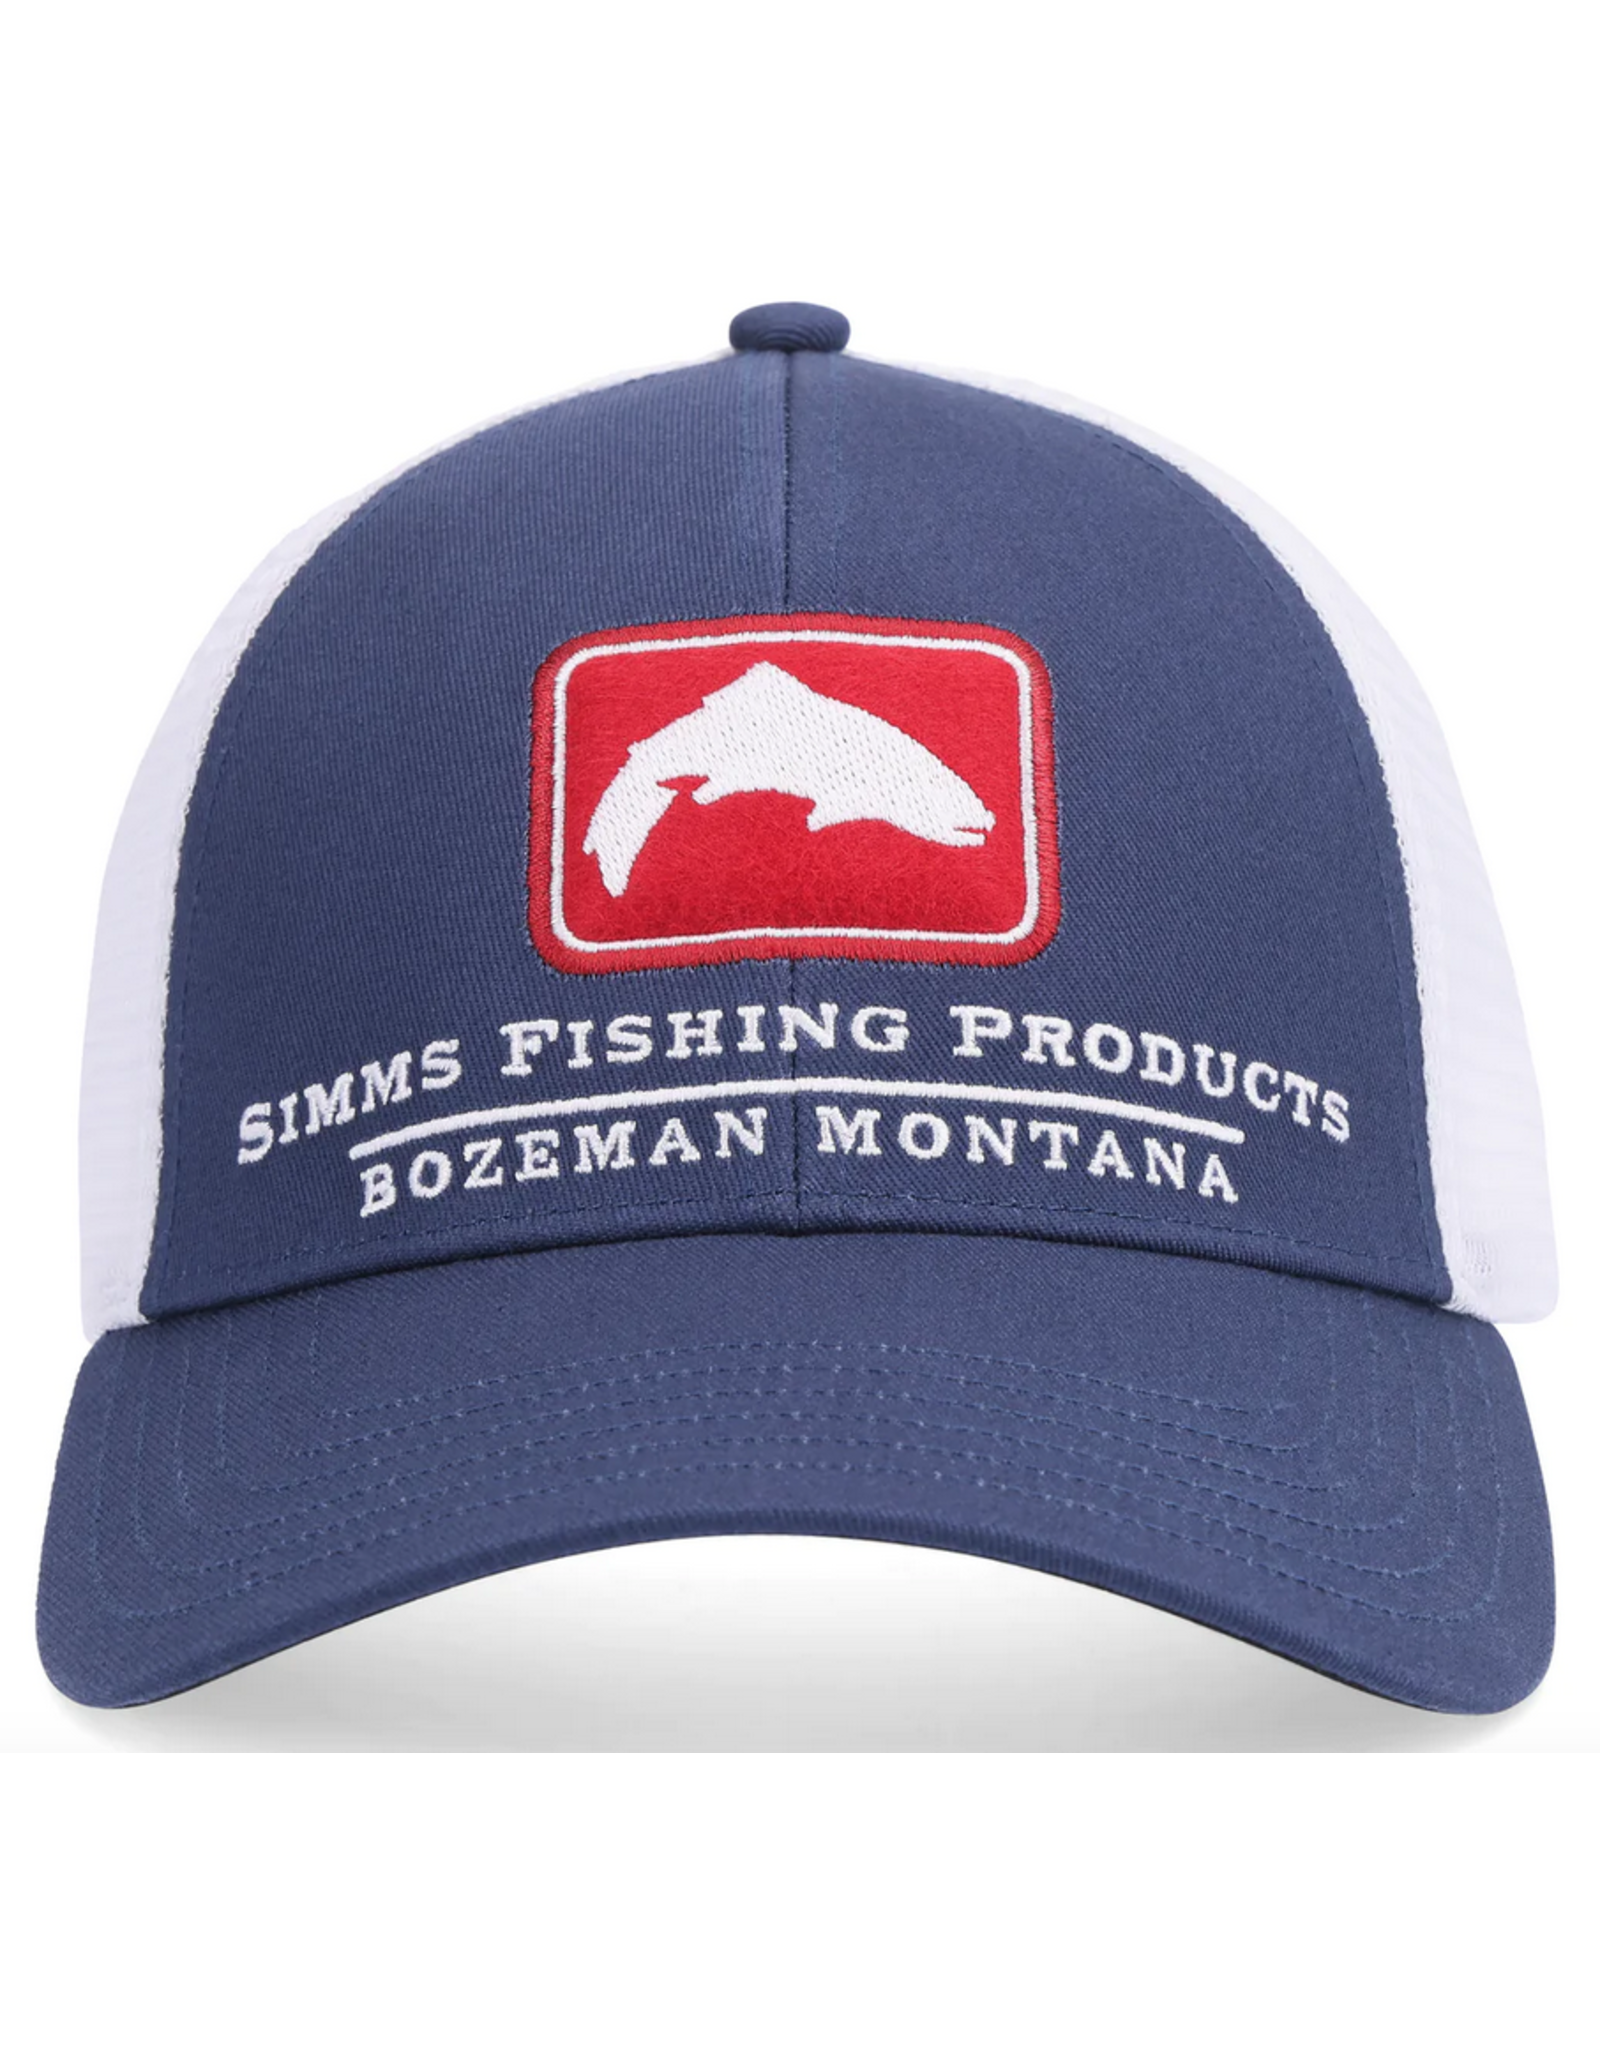 Simms Fly Fishing Cap Snapback Gray Trucker Hat Red White Blue USA